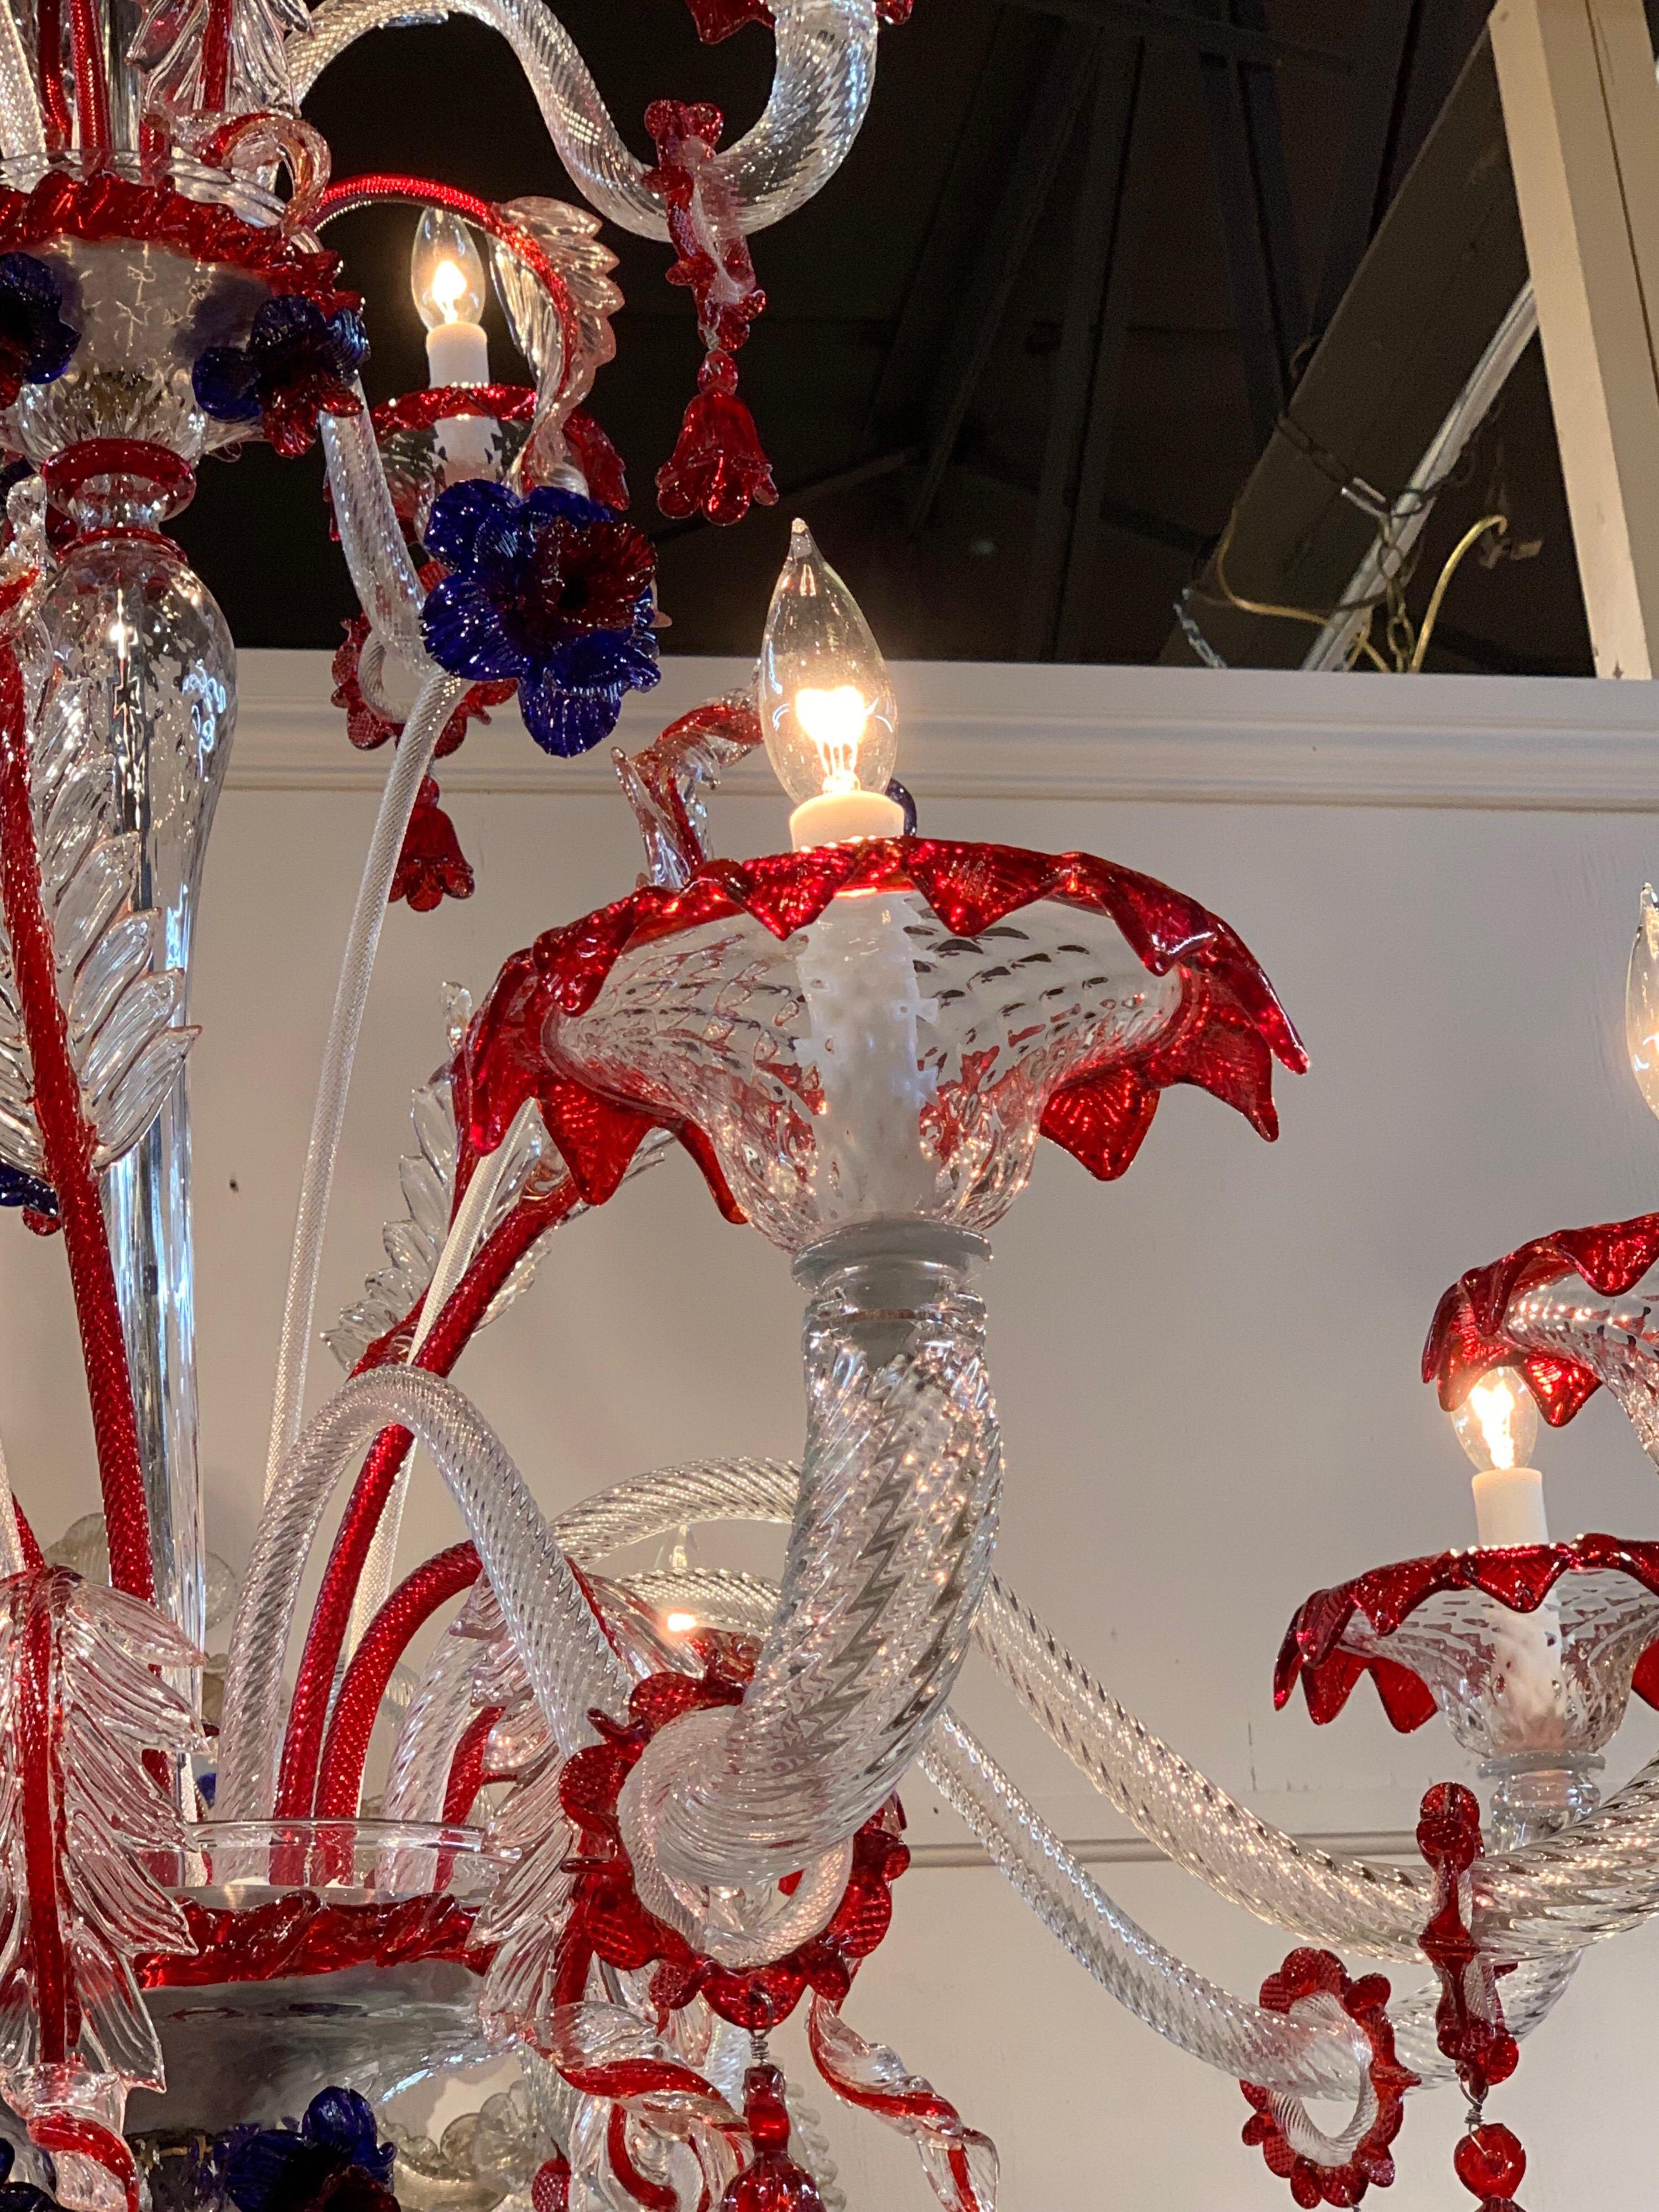 Stunning Murano glass hand blown chandelier with red and blue flowers. This fixture has 12 lights and 3 tiers of cascading flowers and leaves. This unique chandelier makes a real statement!